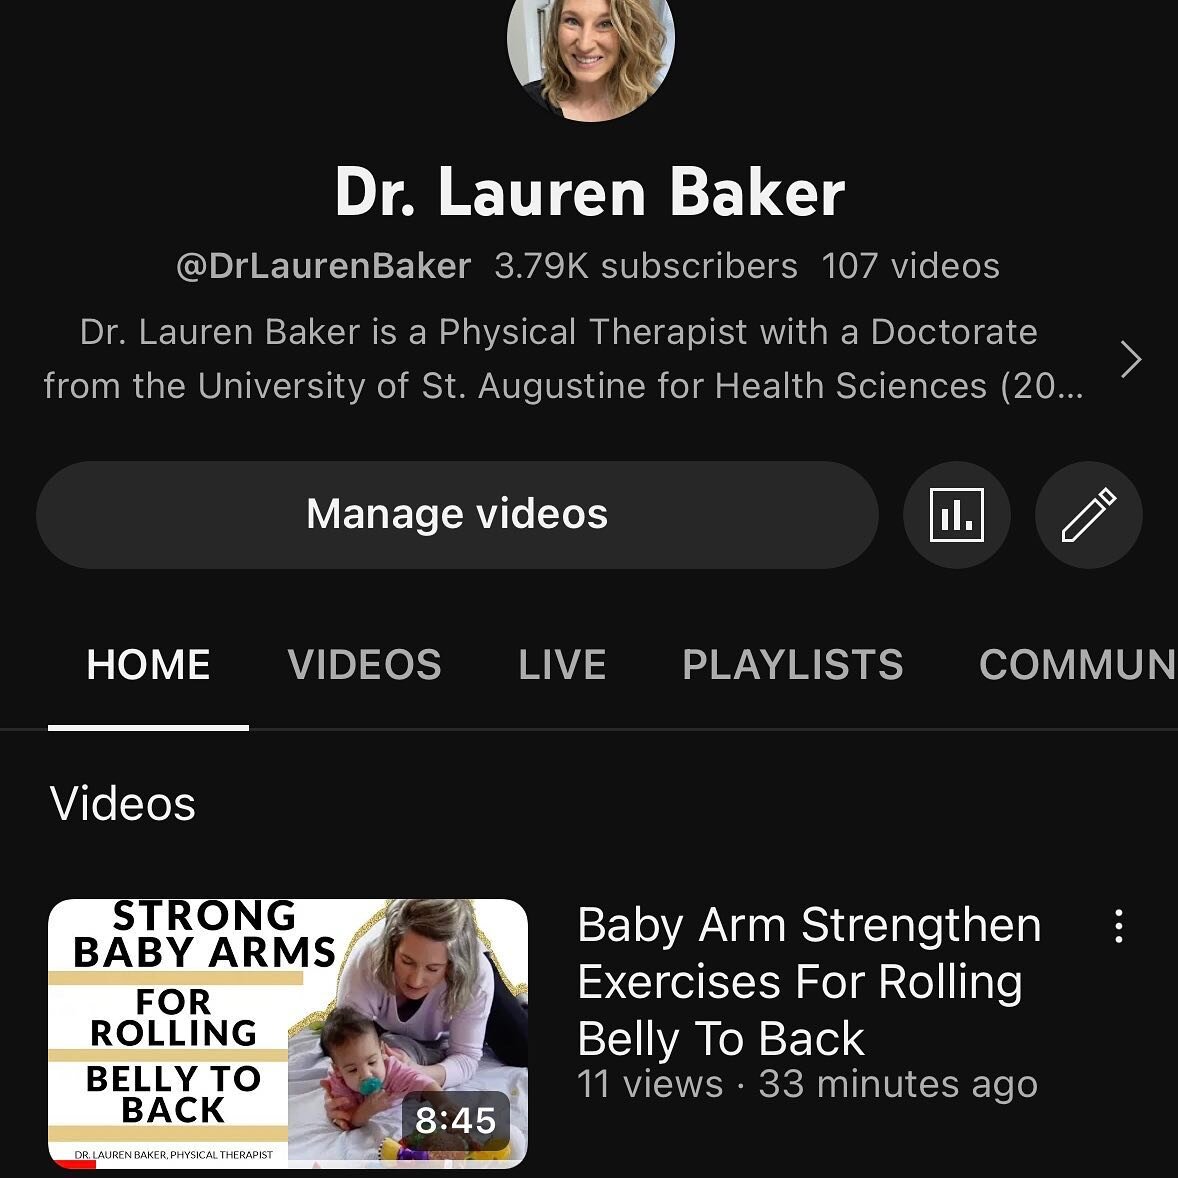 New video up ⚡️

Link in bio ➡️ Youtube ➡️ Learning to Roll Playlist for easiest access no matter when you find this post 

OR 

Open IG in browser &amp; copy/paste this link: https://youtu.be/YOuzqh4W7EU

.
.
.
#learningtoroll #drlaurenbaker #pediat